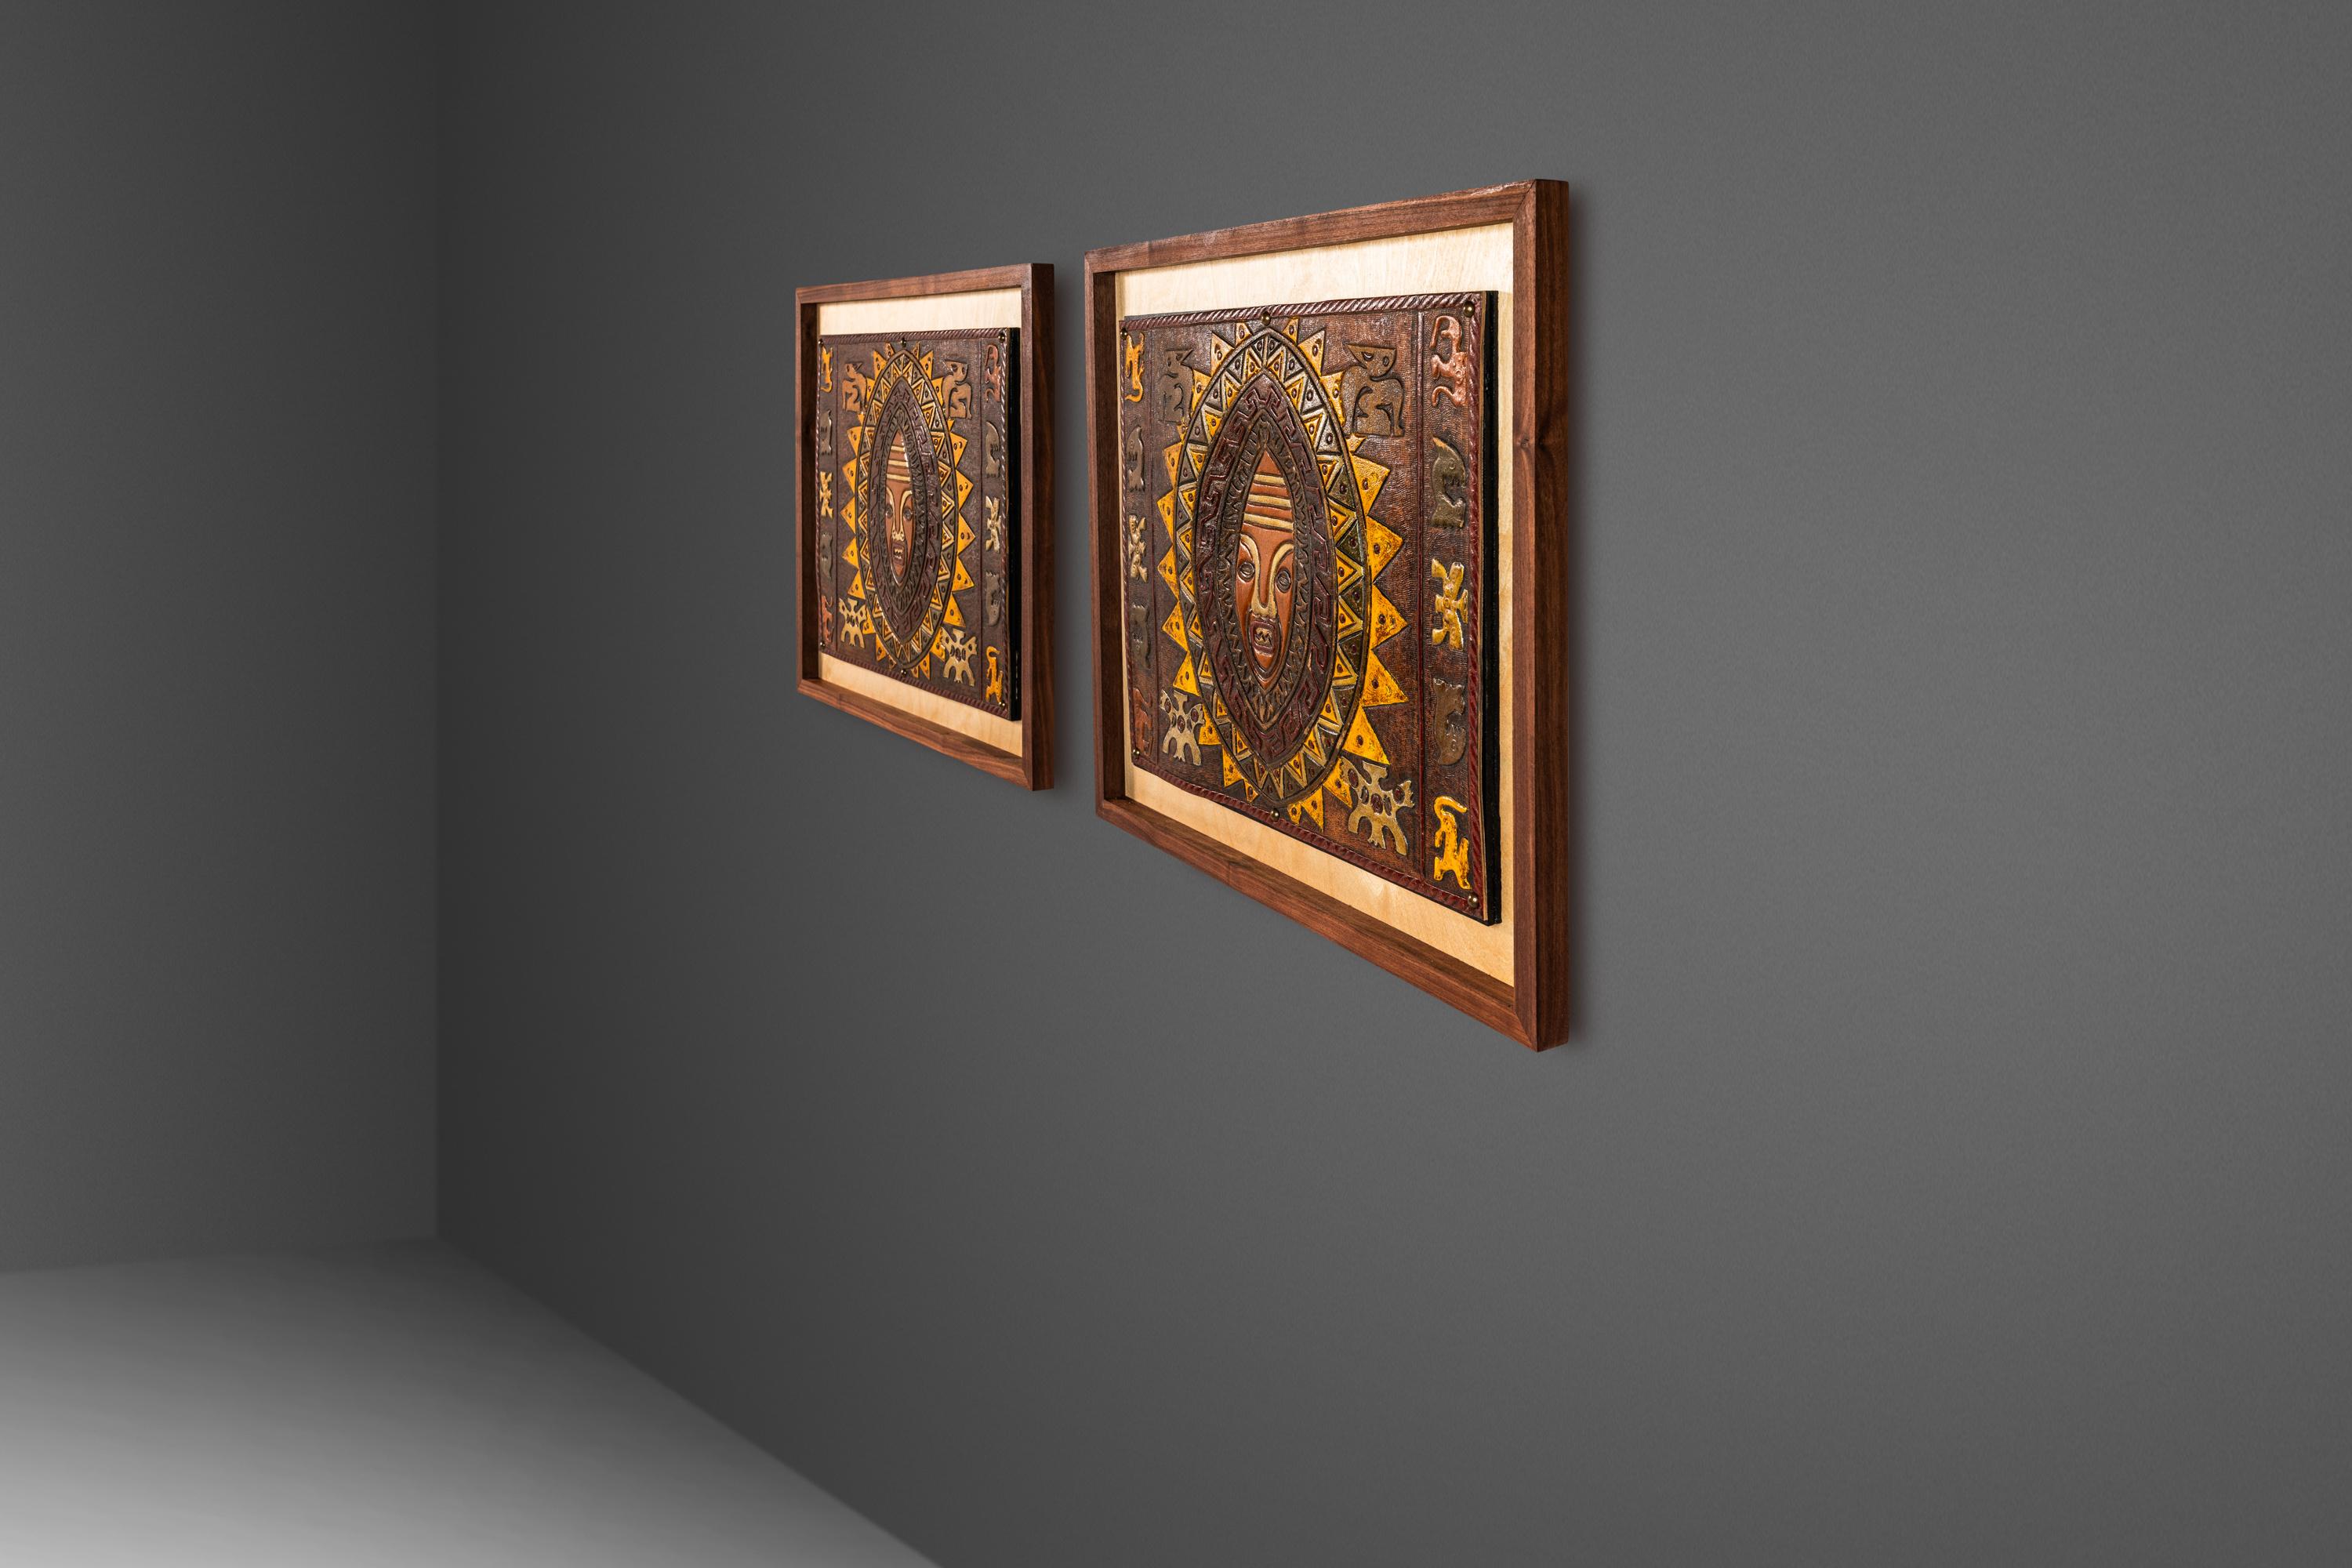 Set of 2 Framed Leather Pre-Columbian Art by Angel Pazmino, Ecuador, c. 1960s For Sale 5